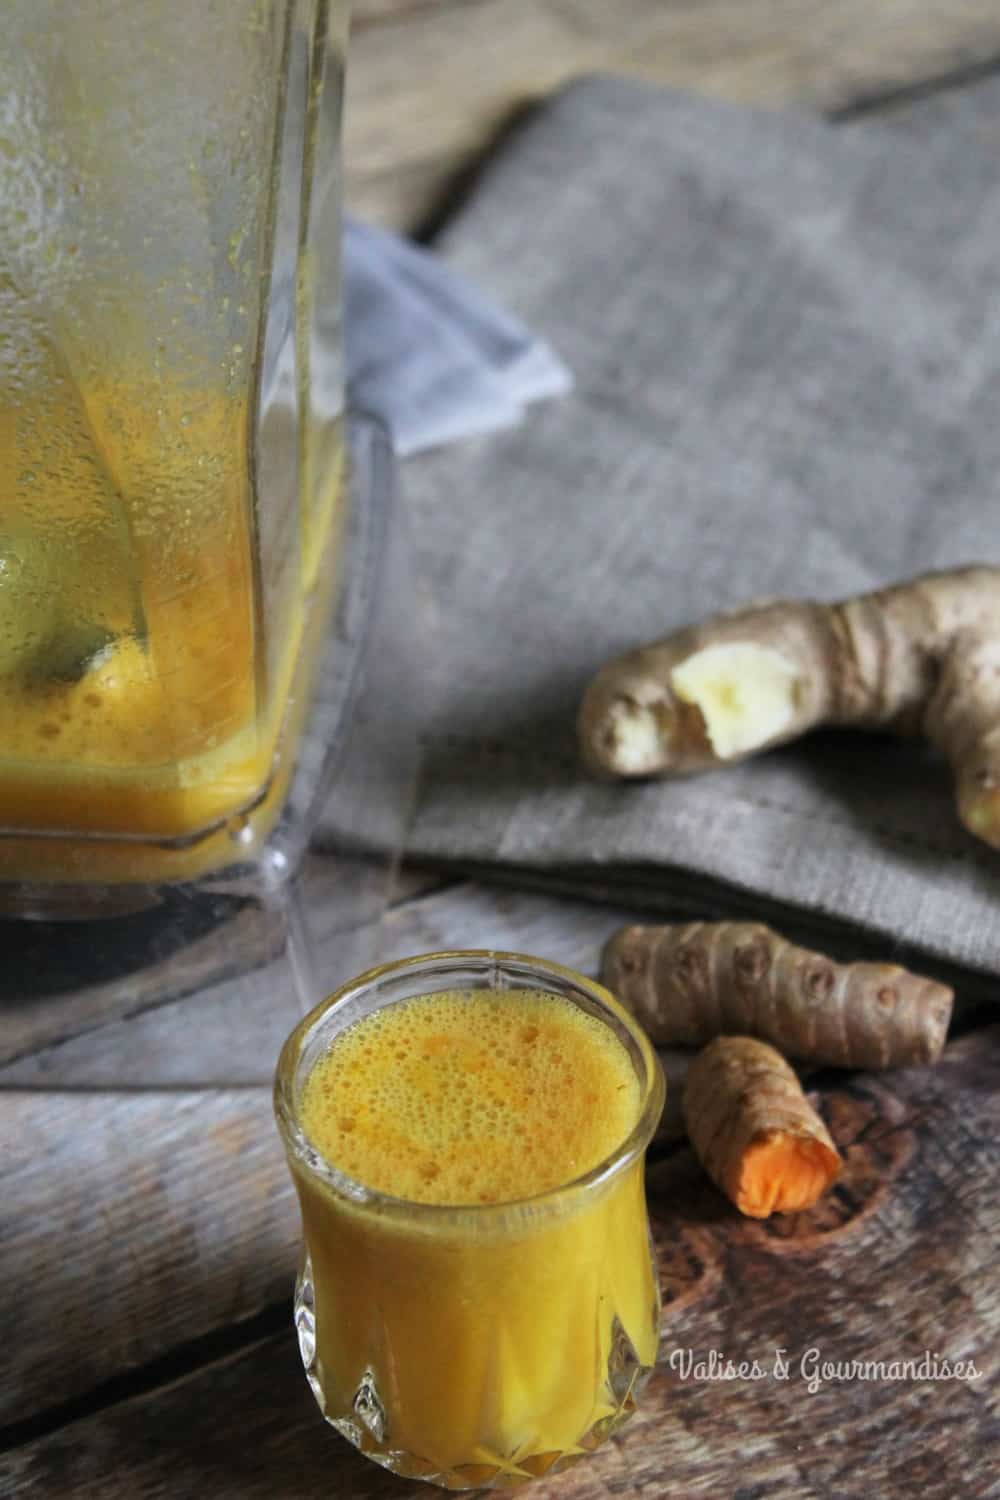 Drink this concentrated flu-fighting orange juice shot to prevent or fight off the cold and the flu!